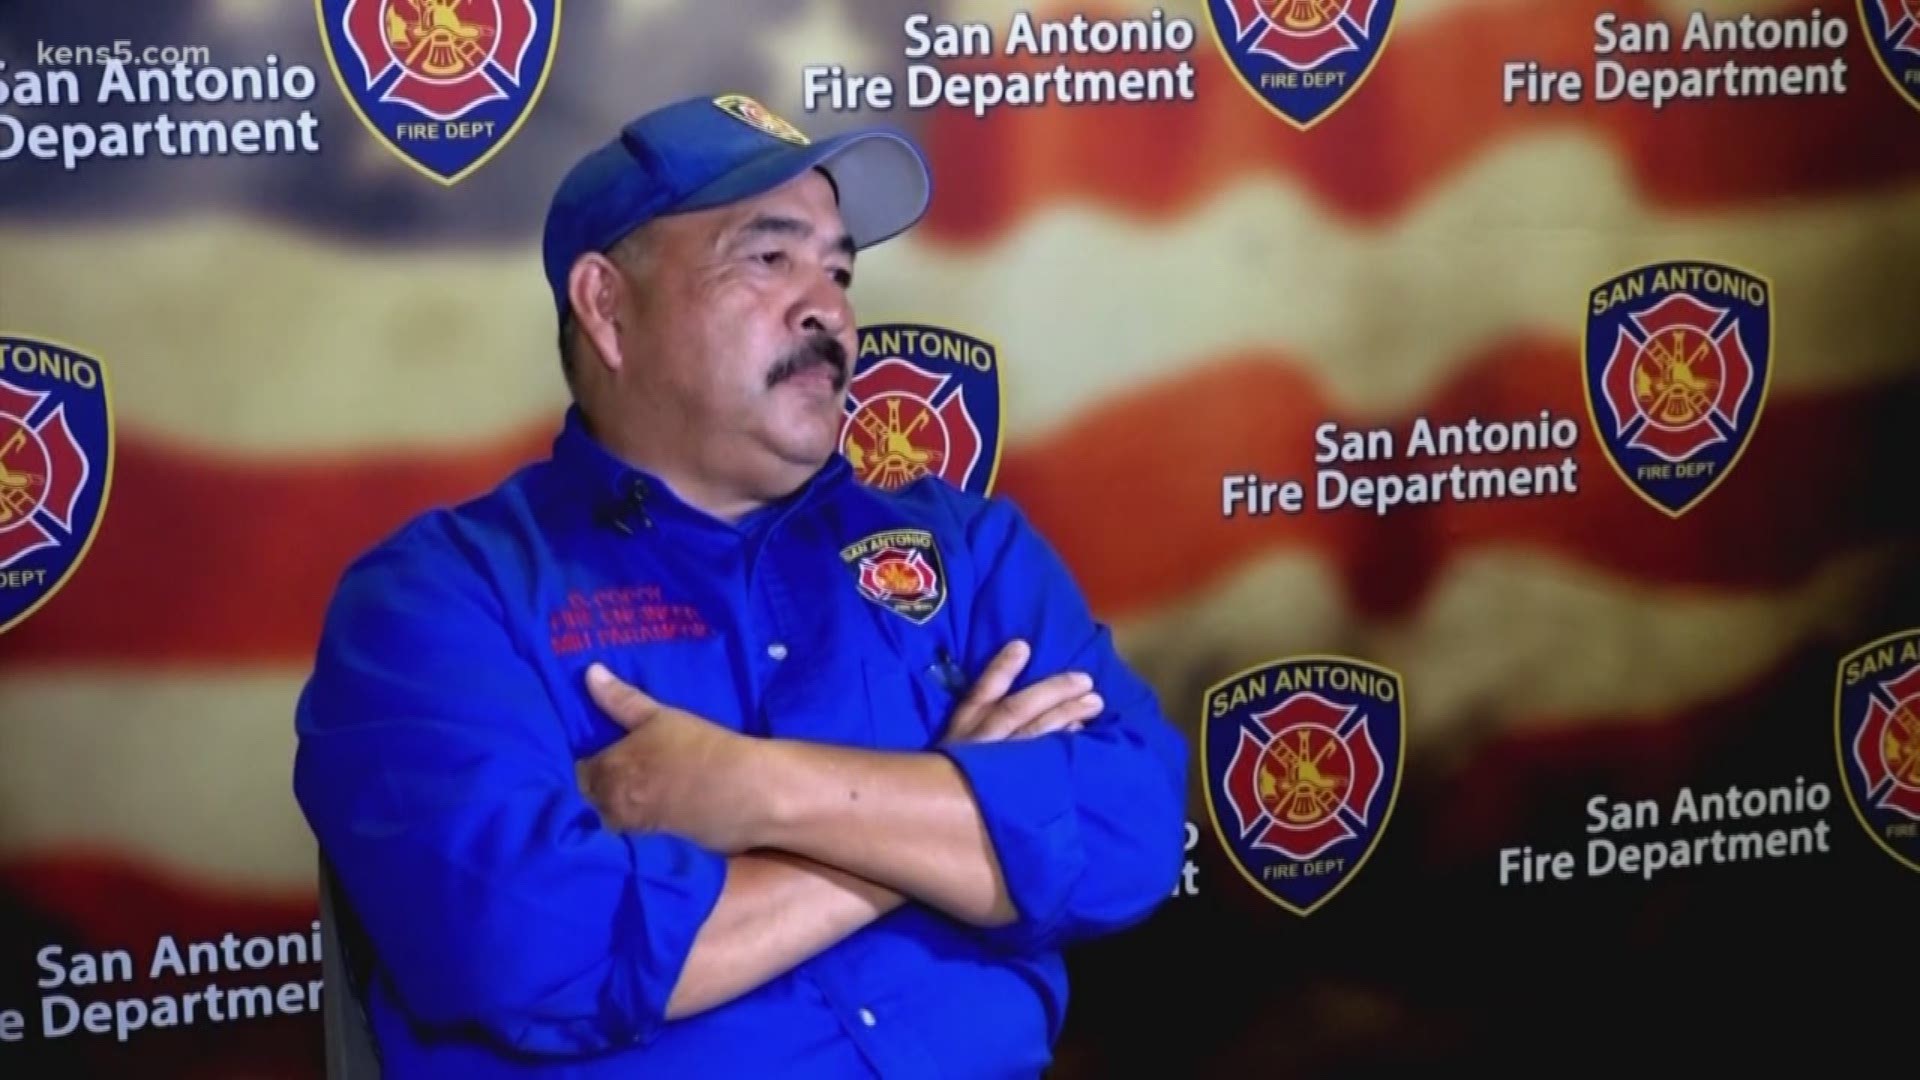 A veteran serving as a Paramedic in San Antonio says his skill set and ability to connect with other military members has been an asset in the city's Mobile Integrated Healthcare program.